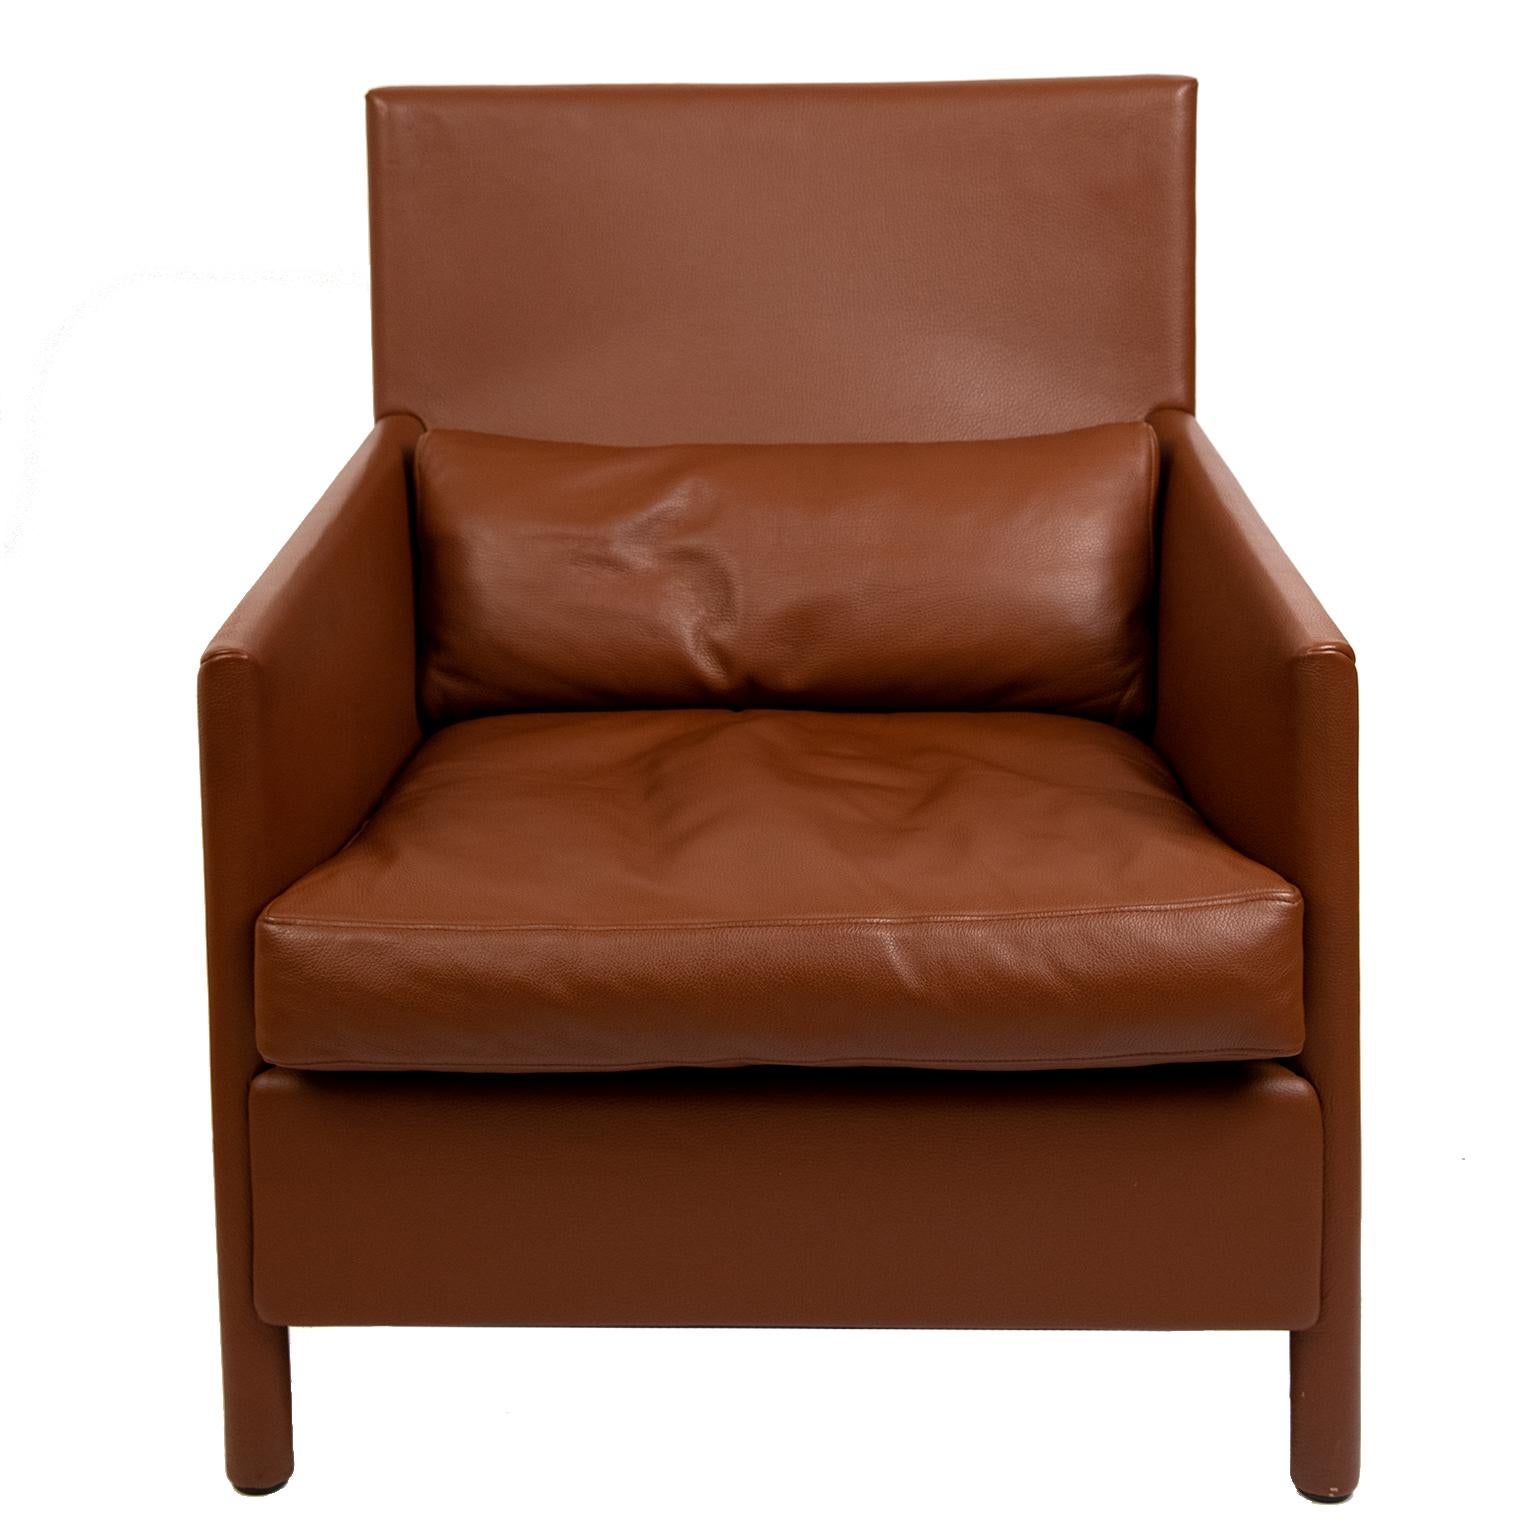 These gorgeous and rich cognac brown full grain leather lounge chairs are in beautiful vintage condition with
no rips or tears. The cushions are down filled. There are 4 available. And are priced per pair.